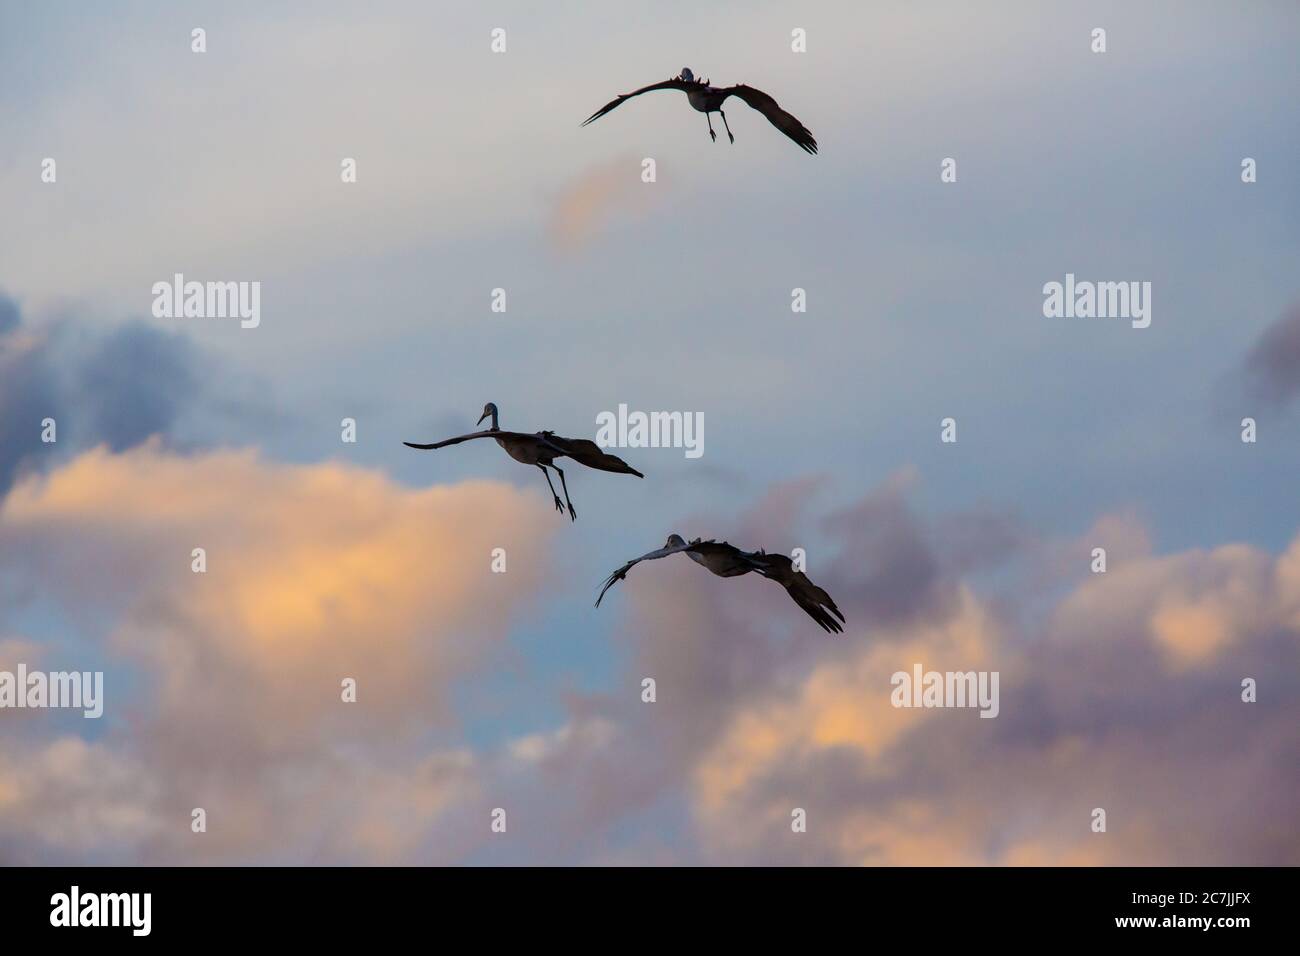 Three  Sandhill Cranes, Antigone canadensis, drop in for a landing in their very characteristic 'sitting' position with a 'gear down, flaps down' conf Stock Photo